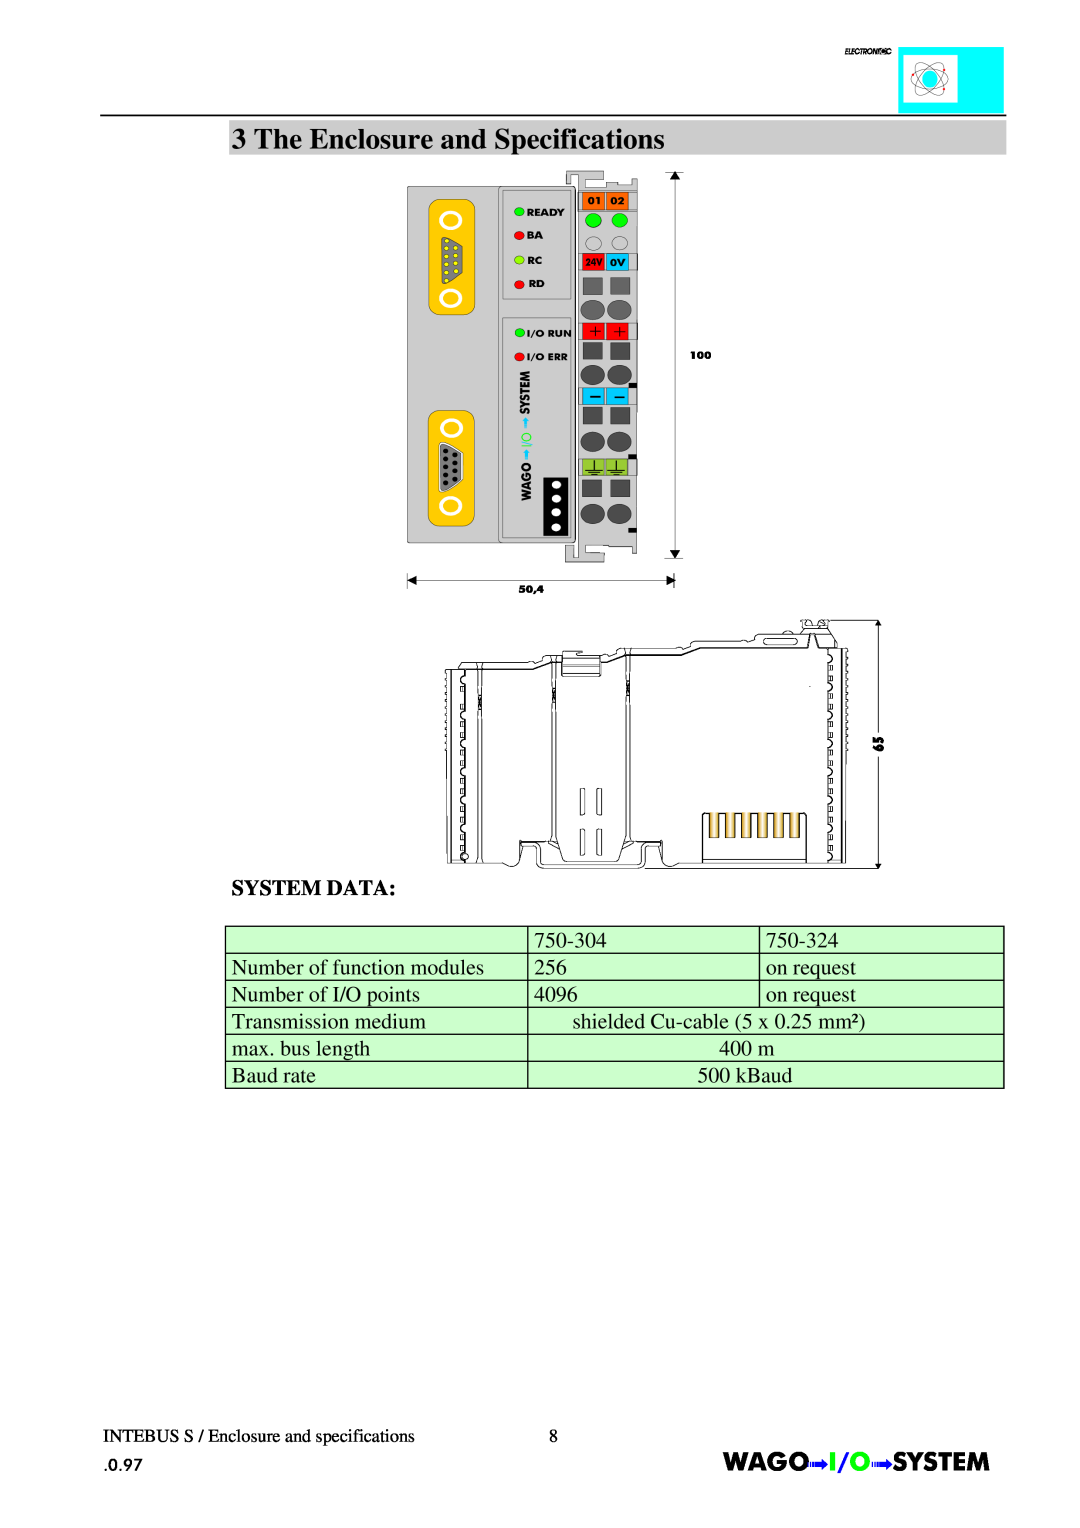 Quatech INTERBUS S manual The Enclosure and Specifications, System Data, $*2Ç,2Ç6670 